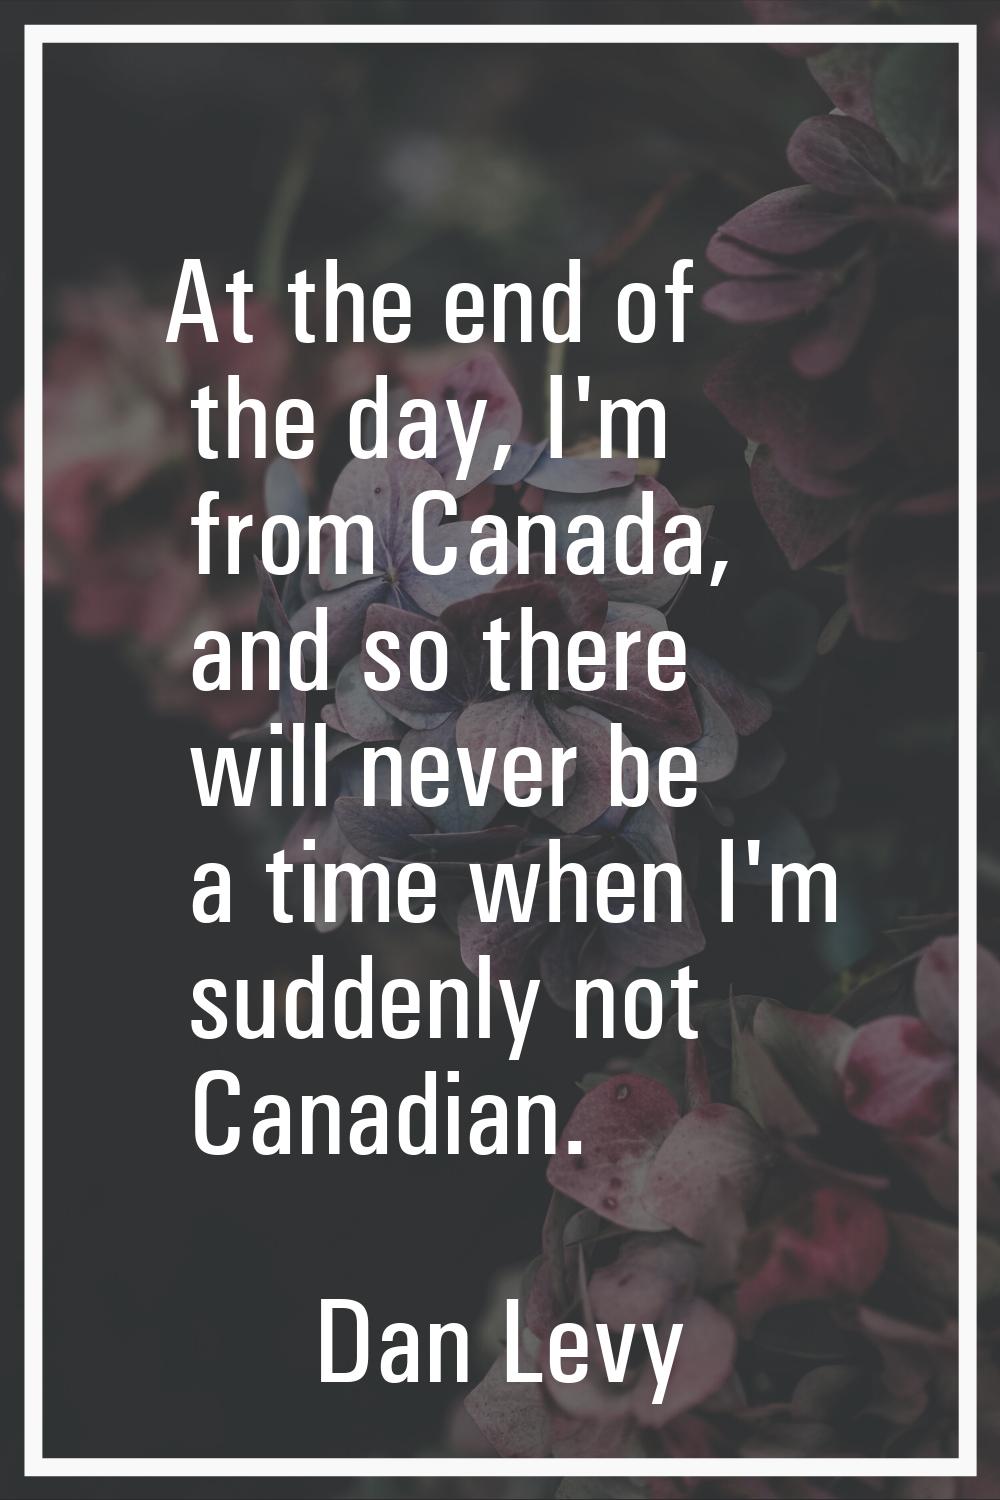 At the end of the day, I'm from Canada, and so there will never be a time when I'm suddenly not Can